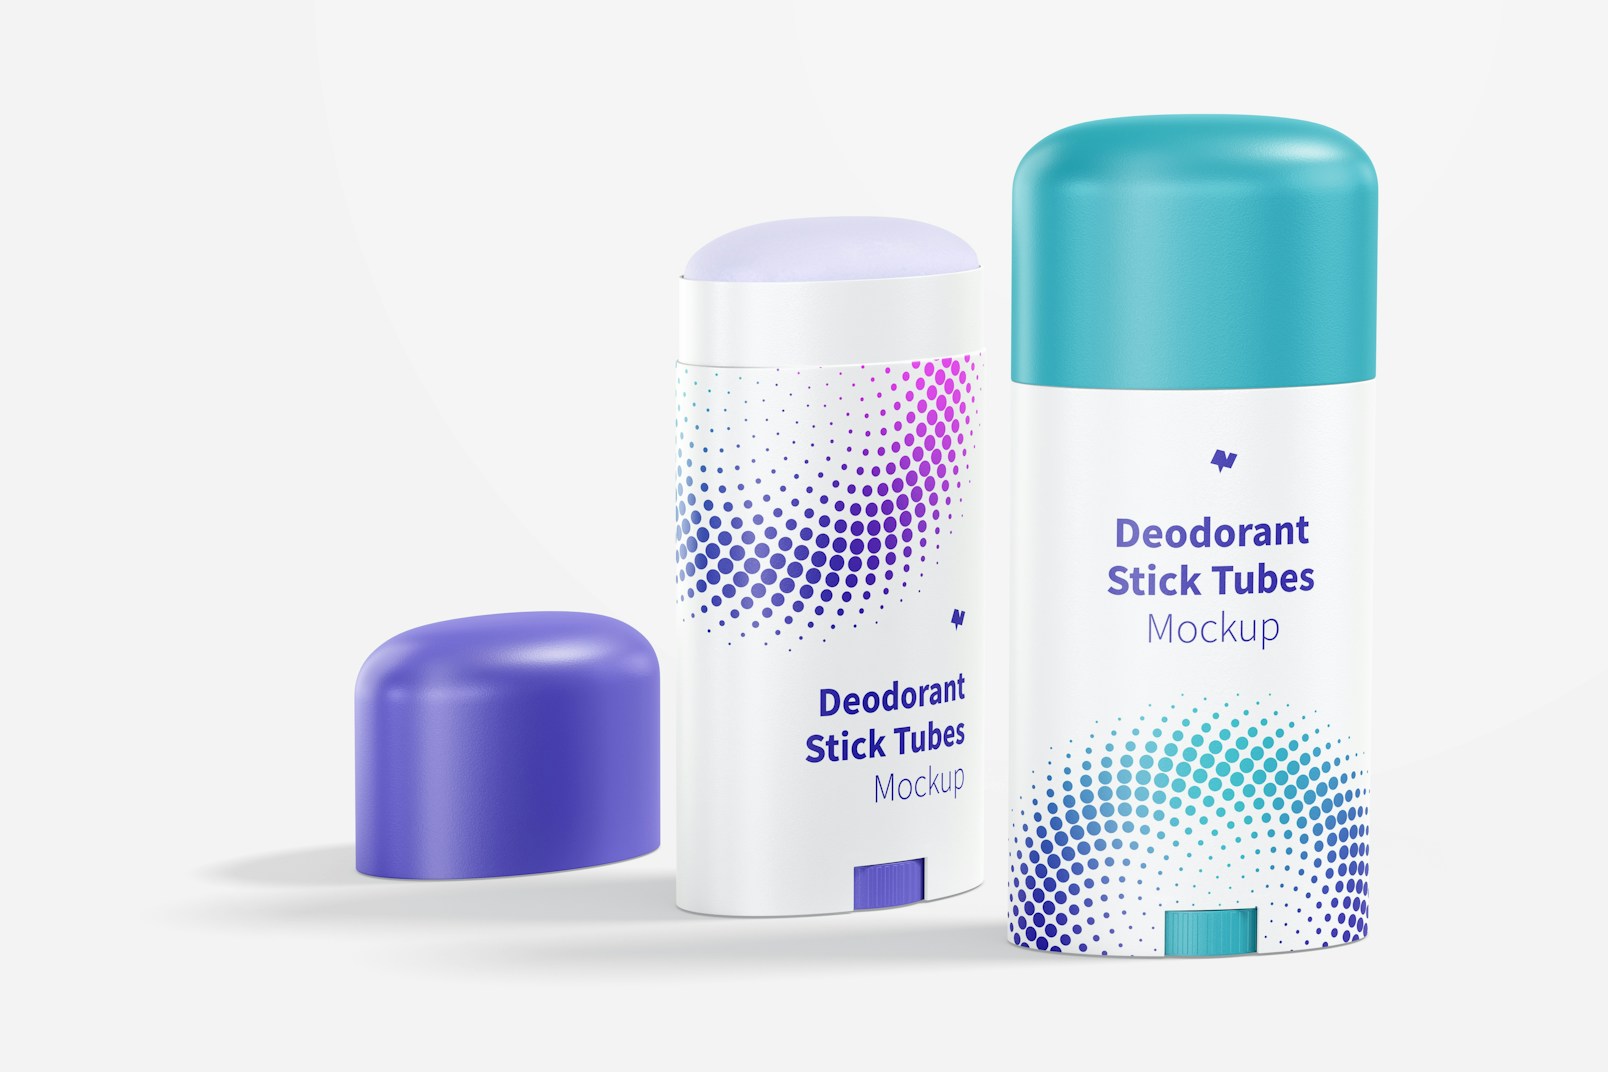 Deodorant Stick Tubes Mockup, Opened and Closed